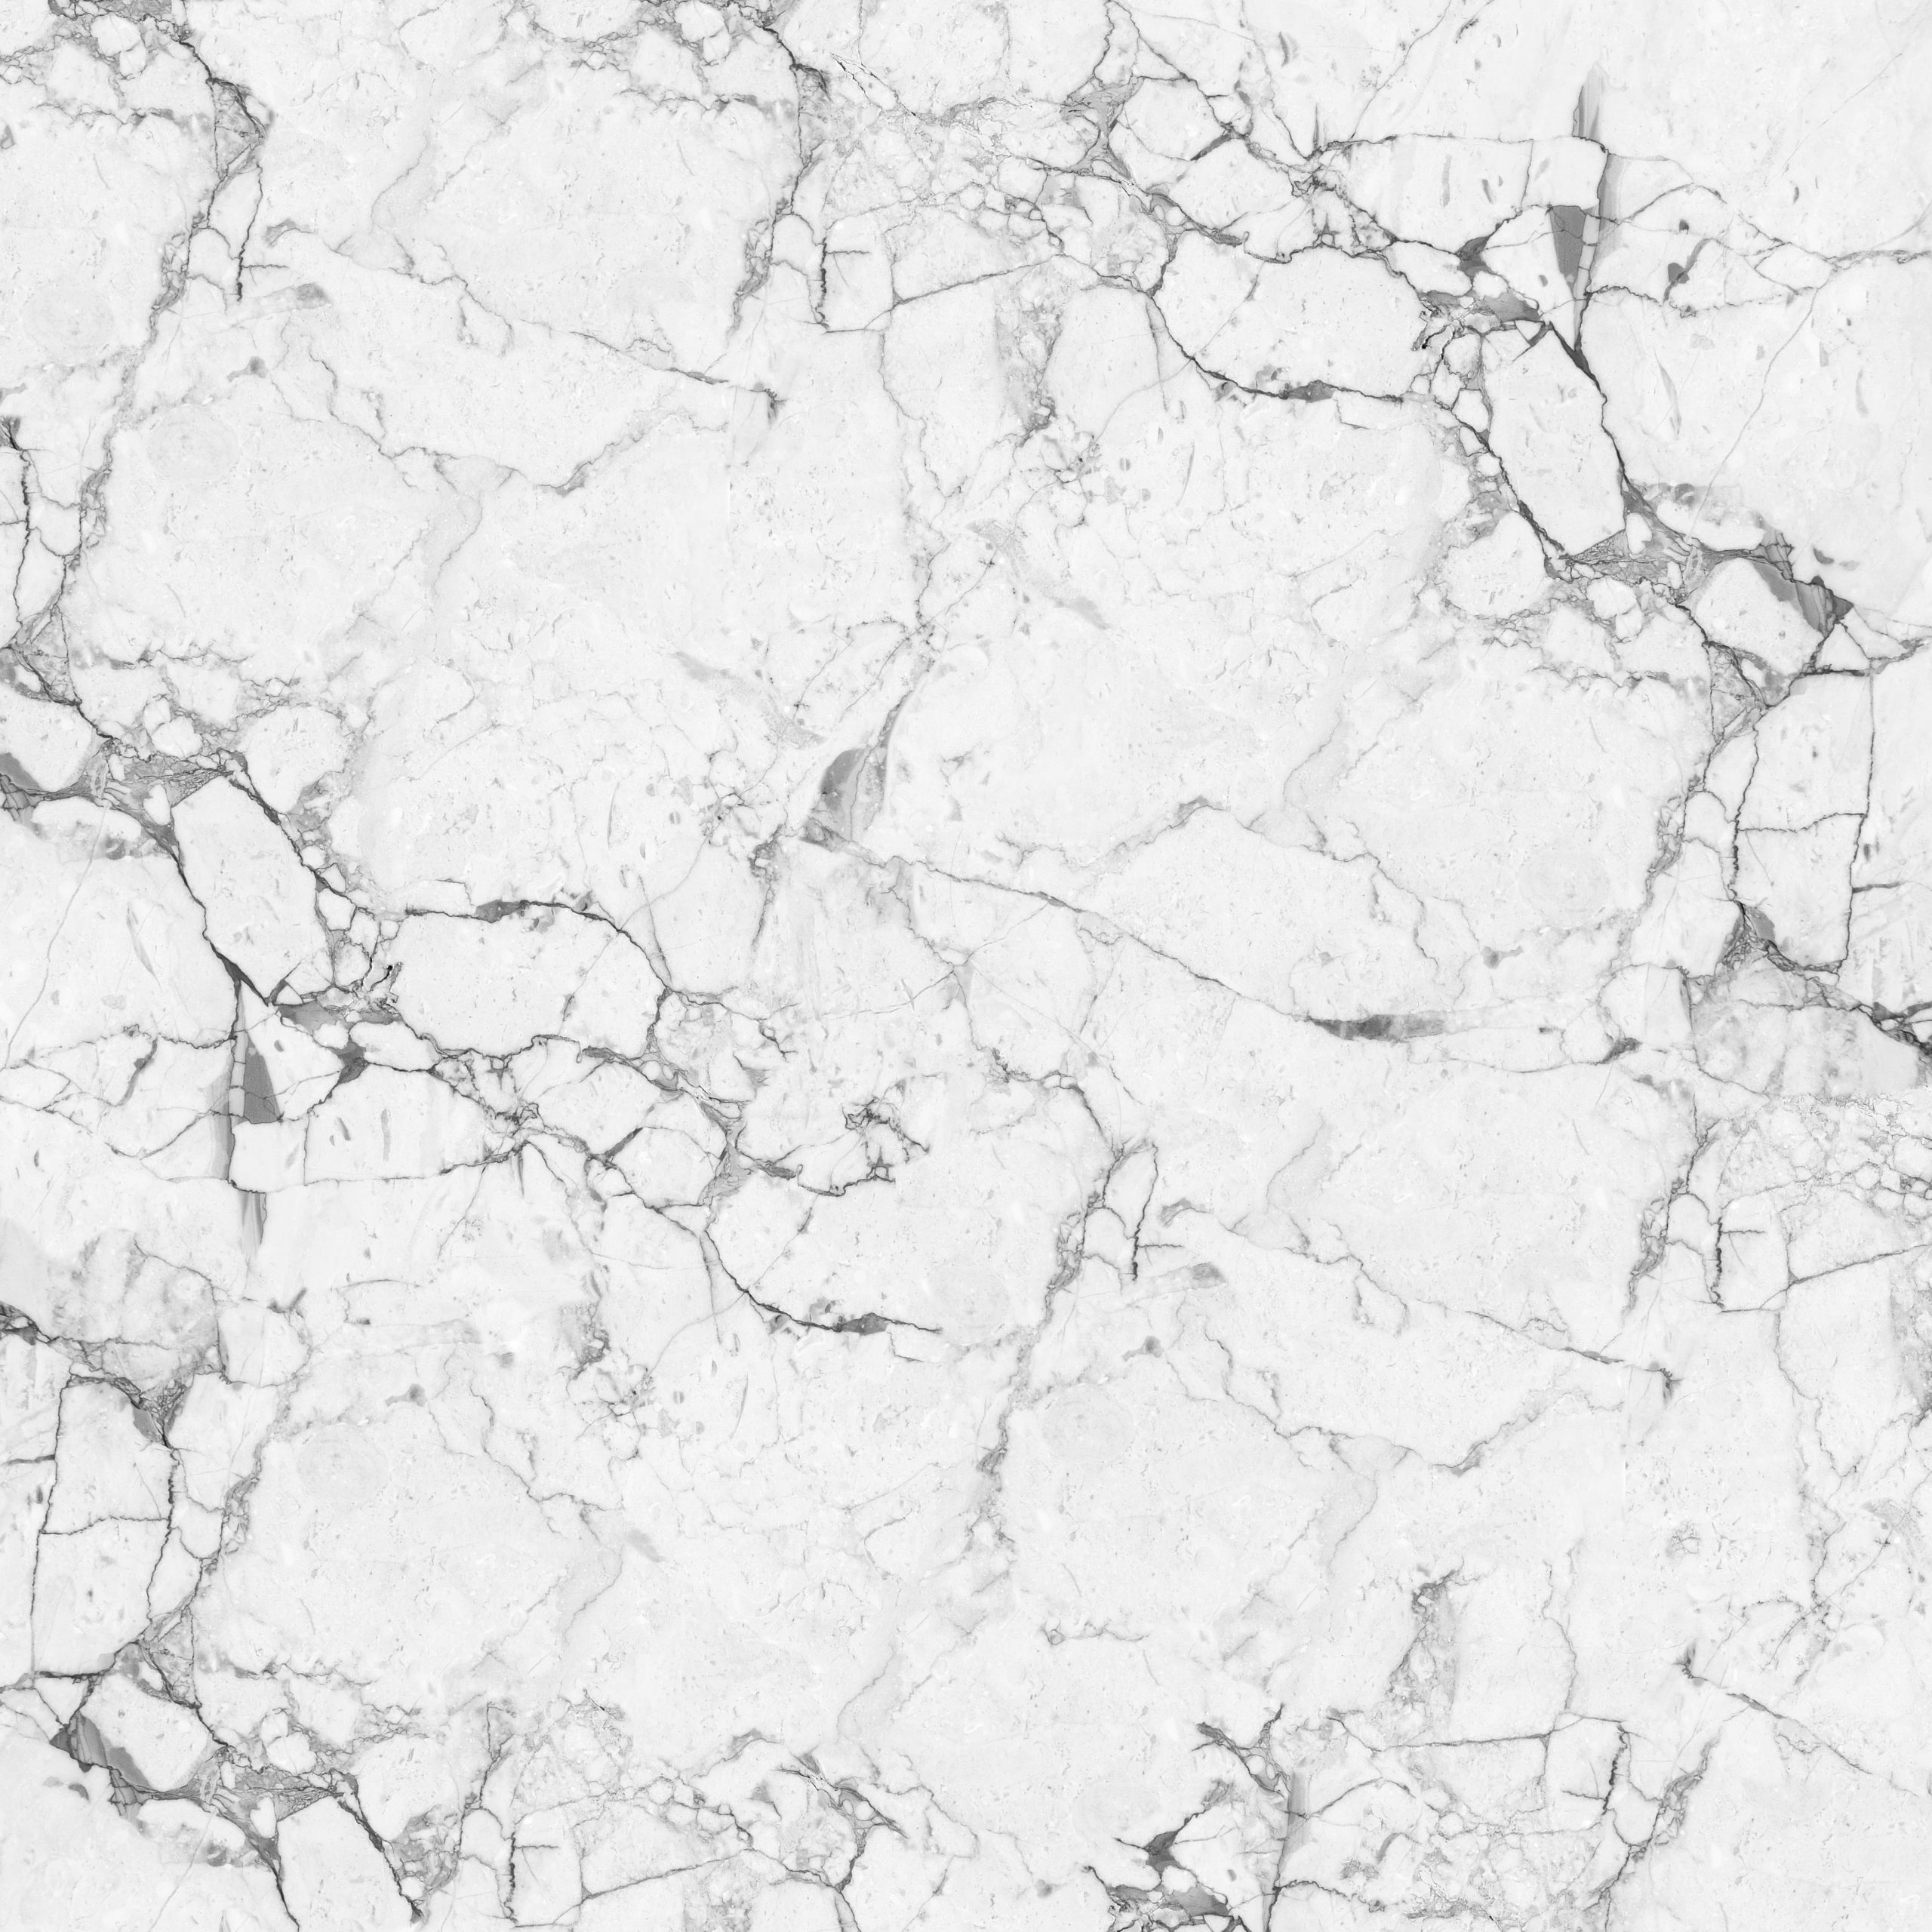 Marble wallpaper context background marble the surface